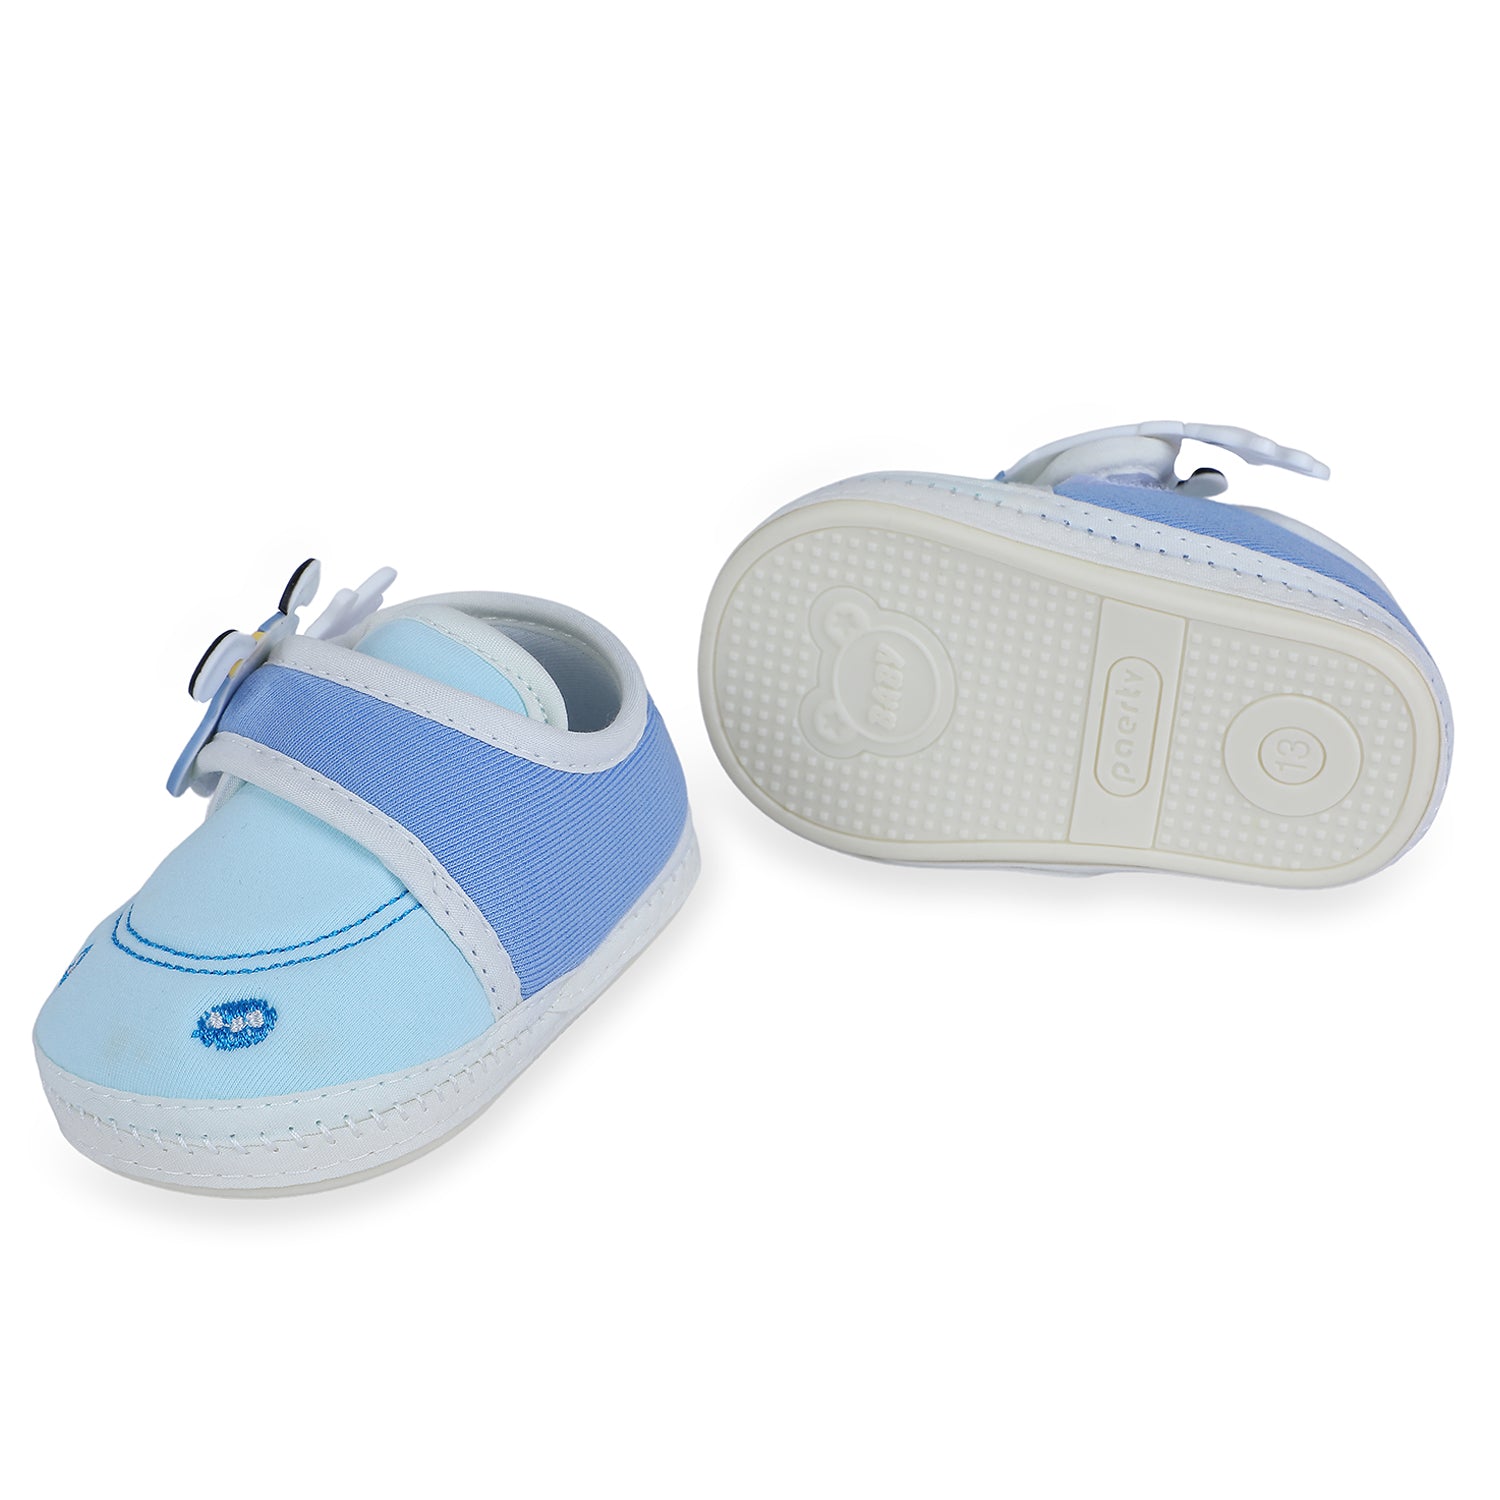 Baby Moo Puppy Face Soft Sole Anti-Slip Booties - Blue - Baby Moo